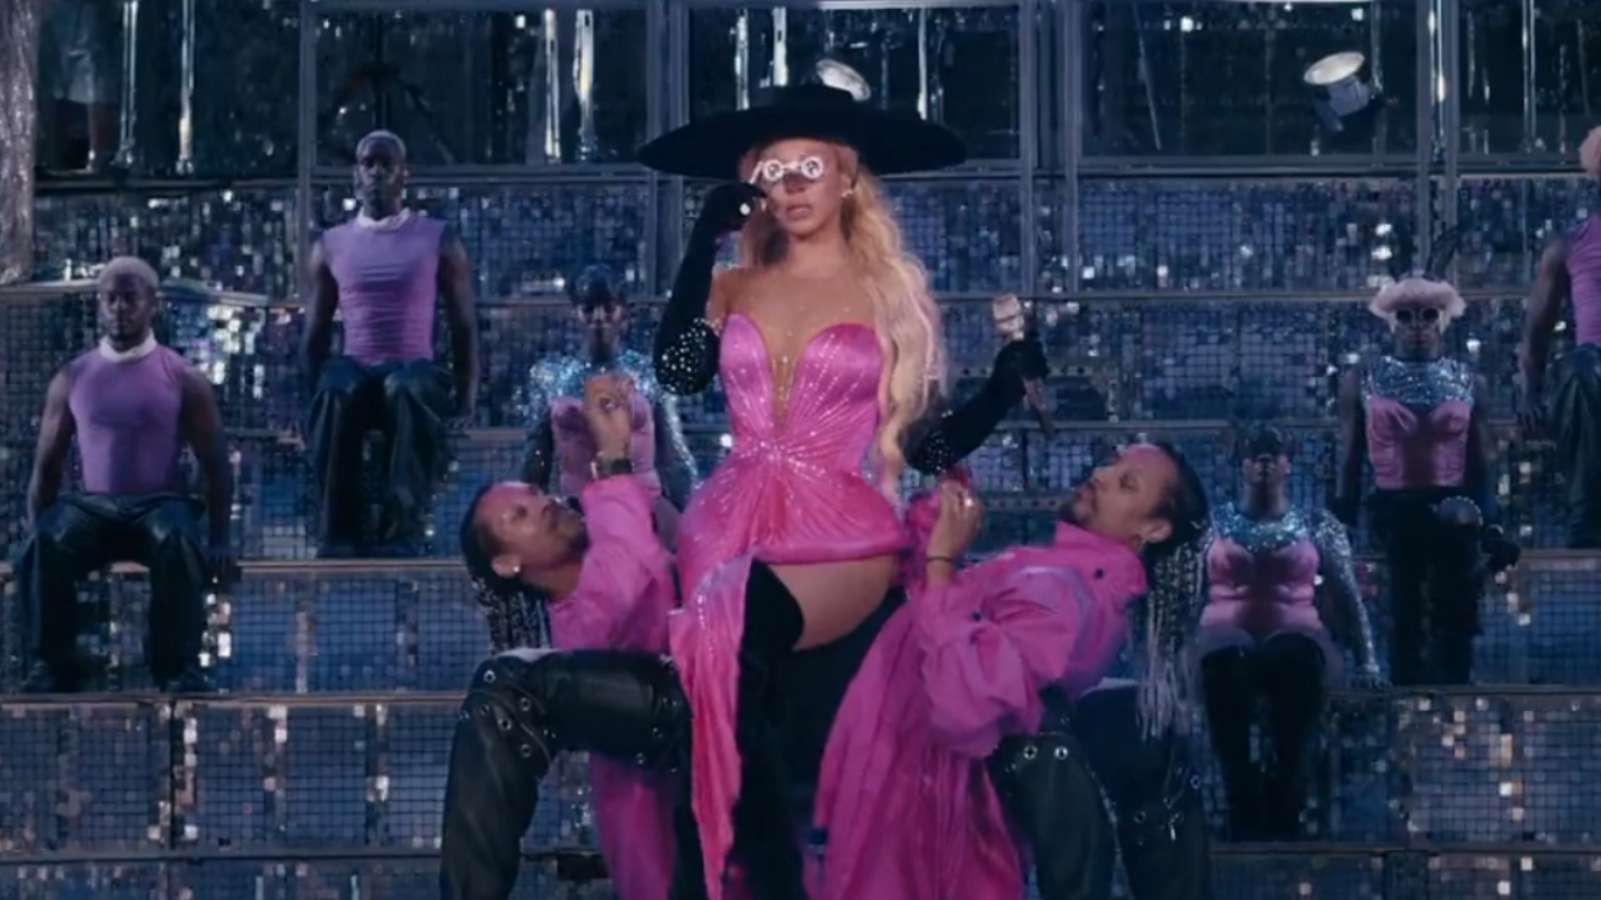 Beyonce performs in a pink outfit onstage in a concert.